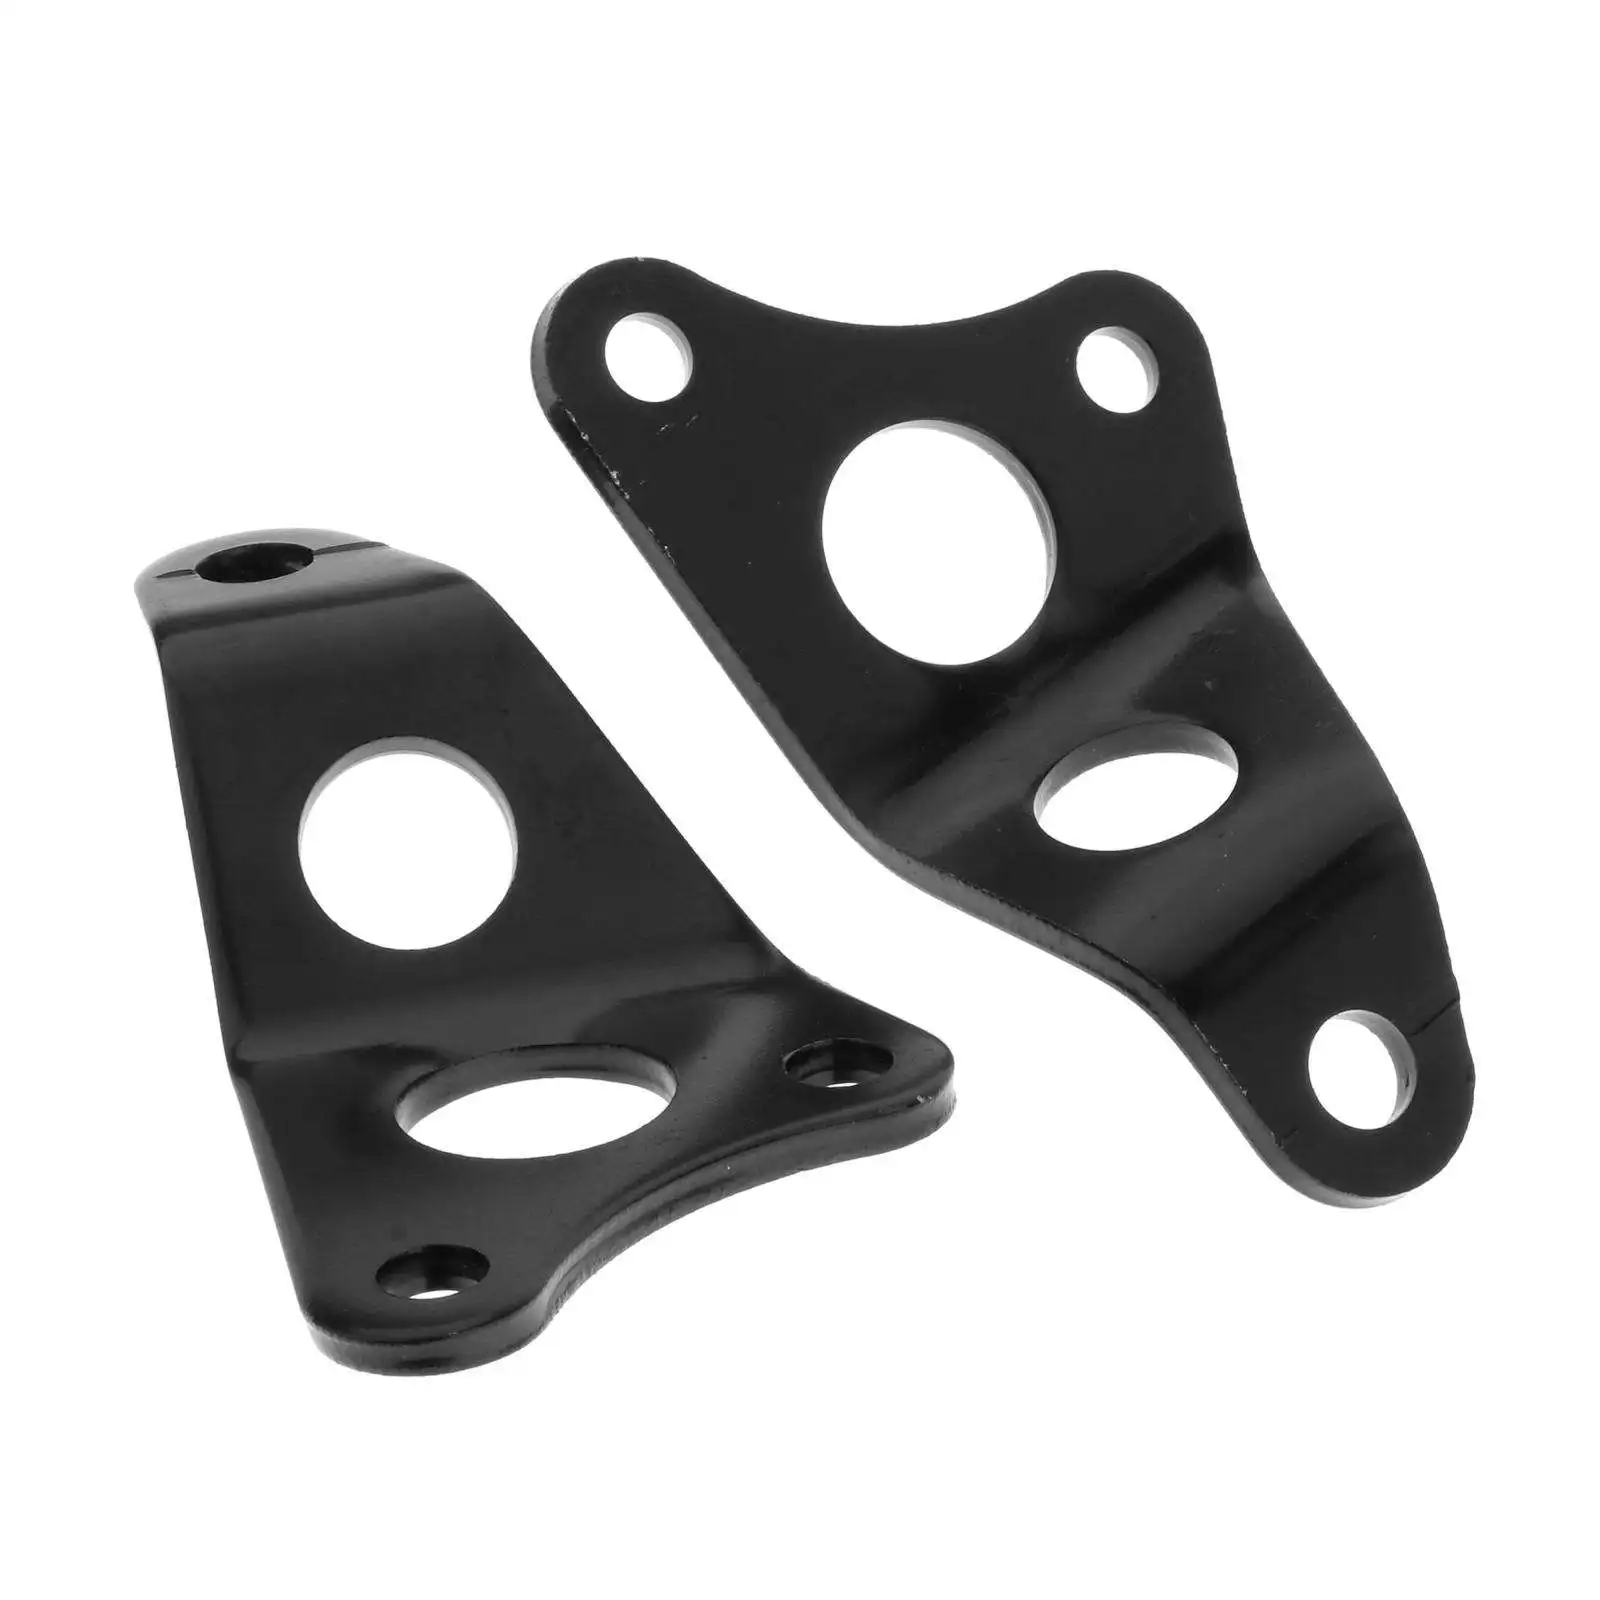 Front Motor Engine Mounts Stays For Yamaha YFZ450 YFZ 450 2004-2013 5D3-21316-01-00 5D3-21317-01-00 Replacement 2x